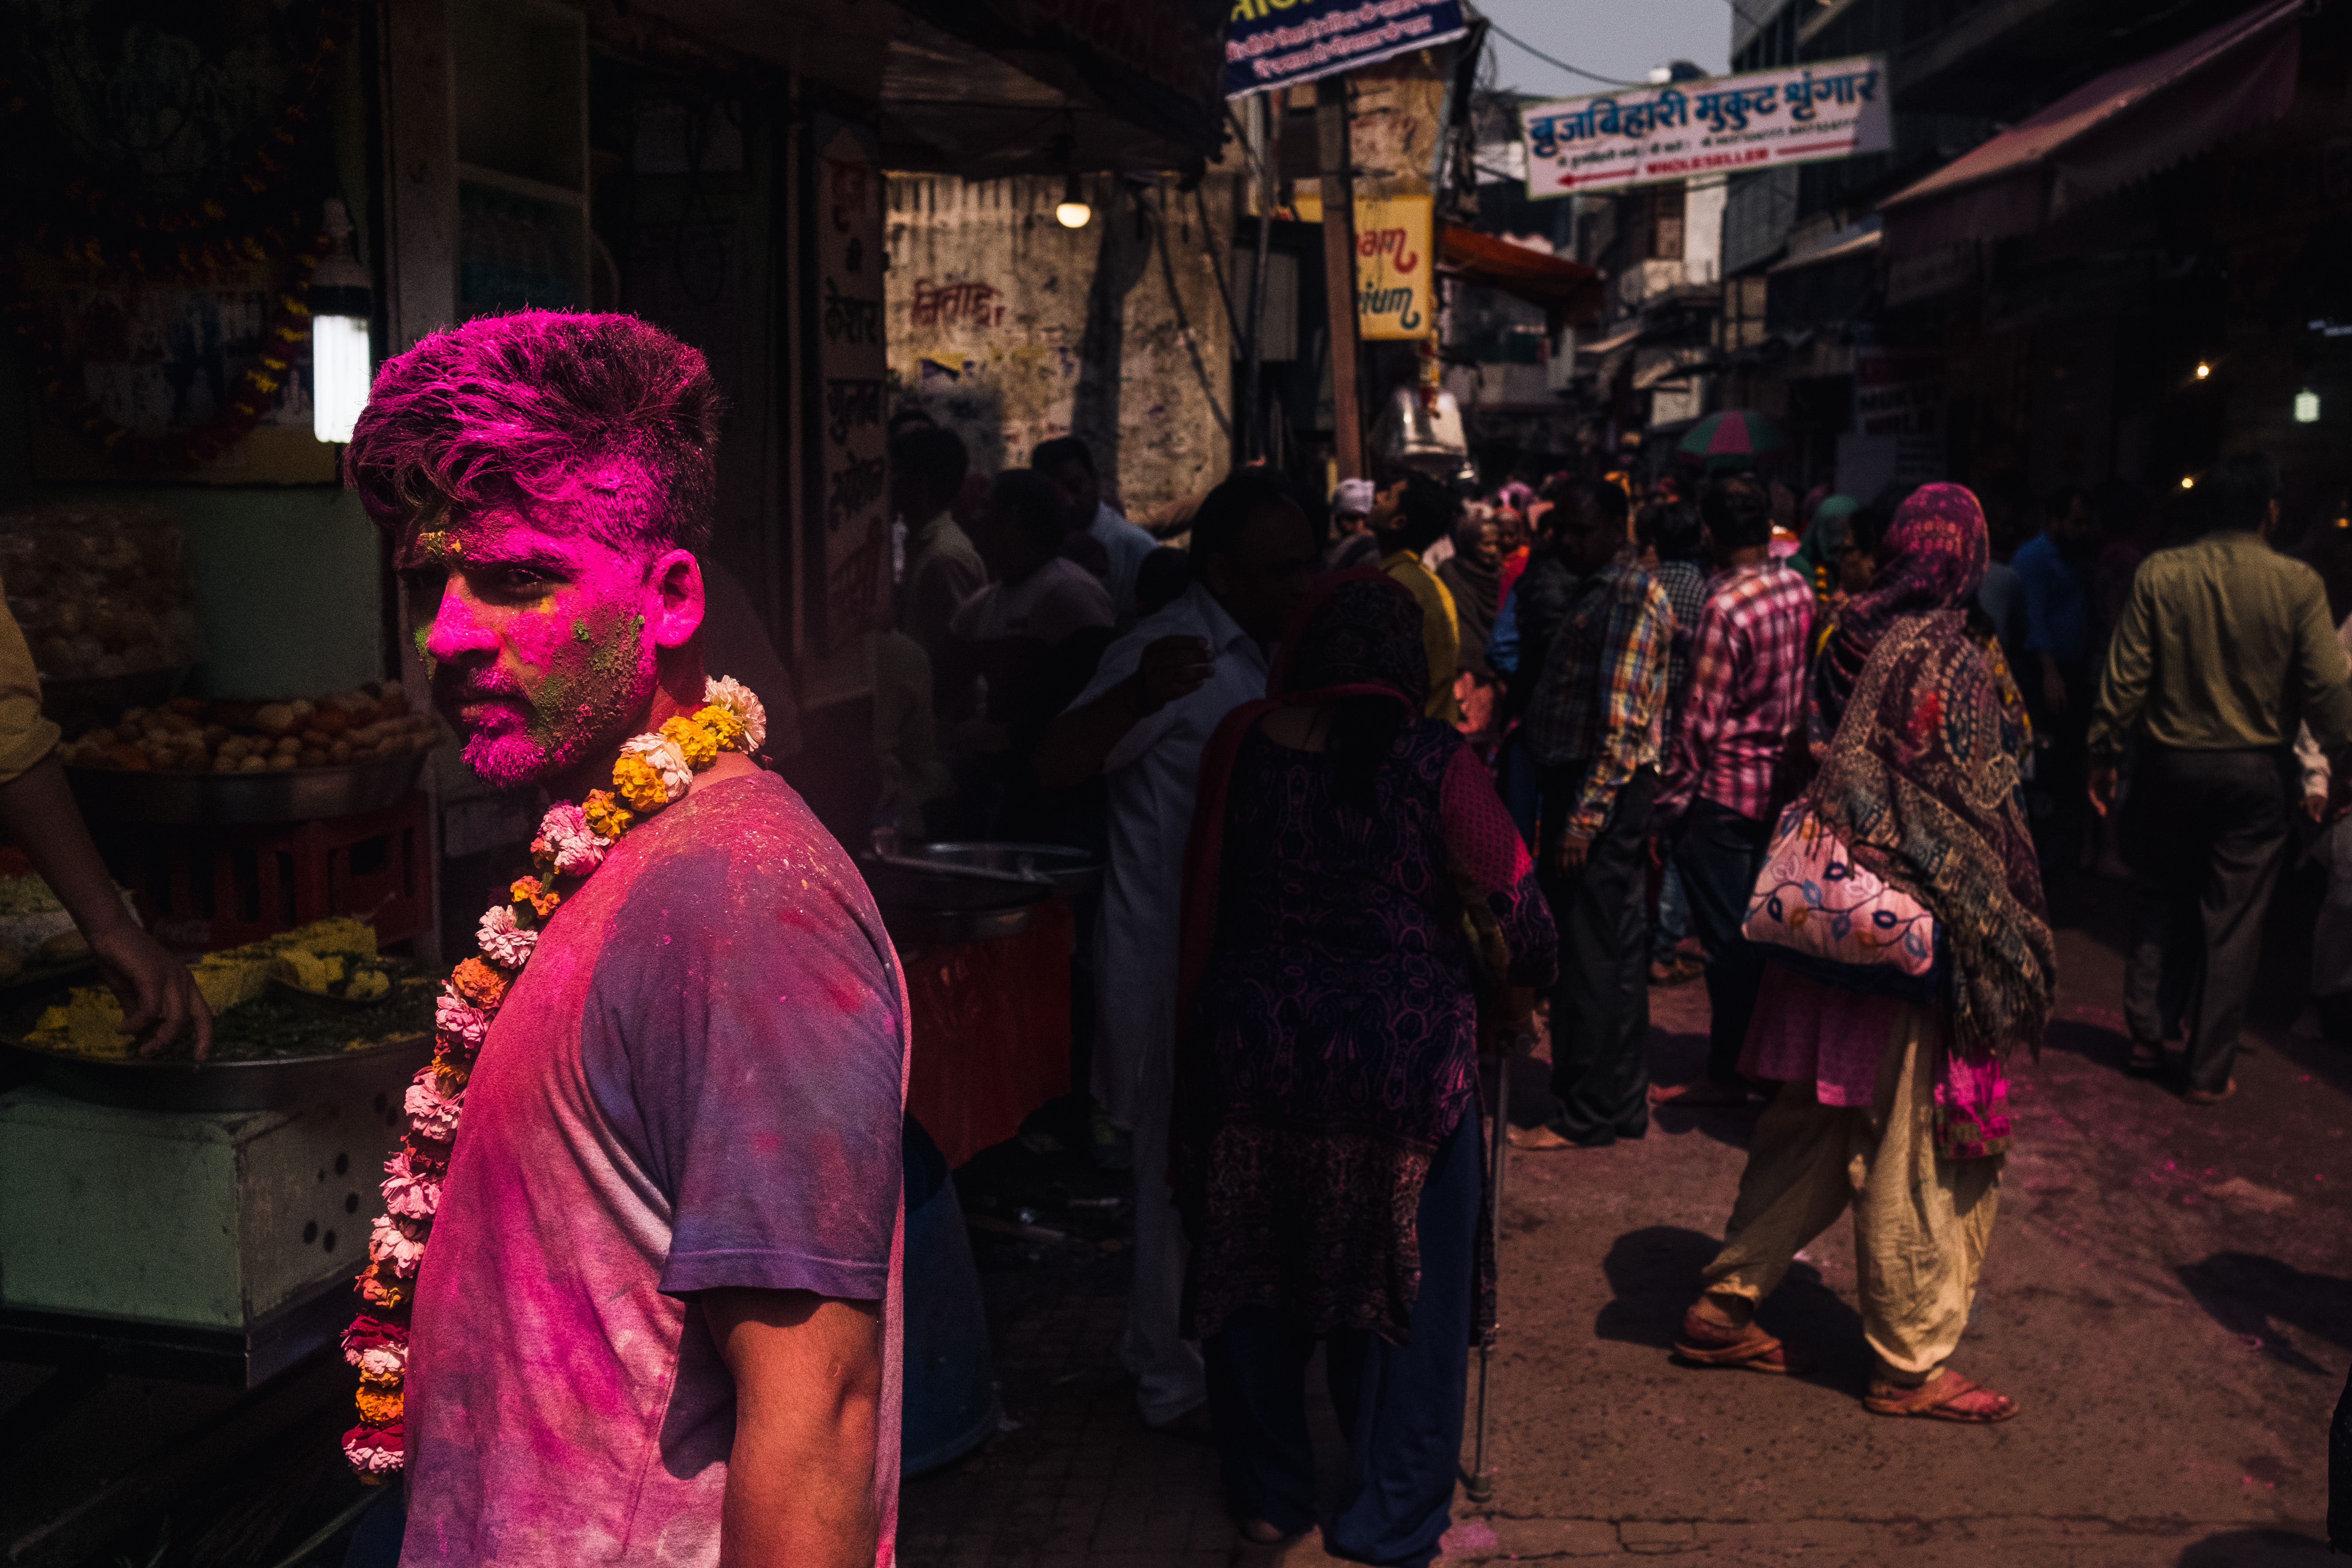 India Street Photography During Holi Festival. Man covered in pink. Images by Jason Vinson